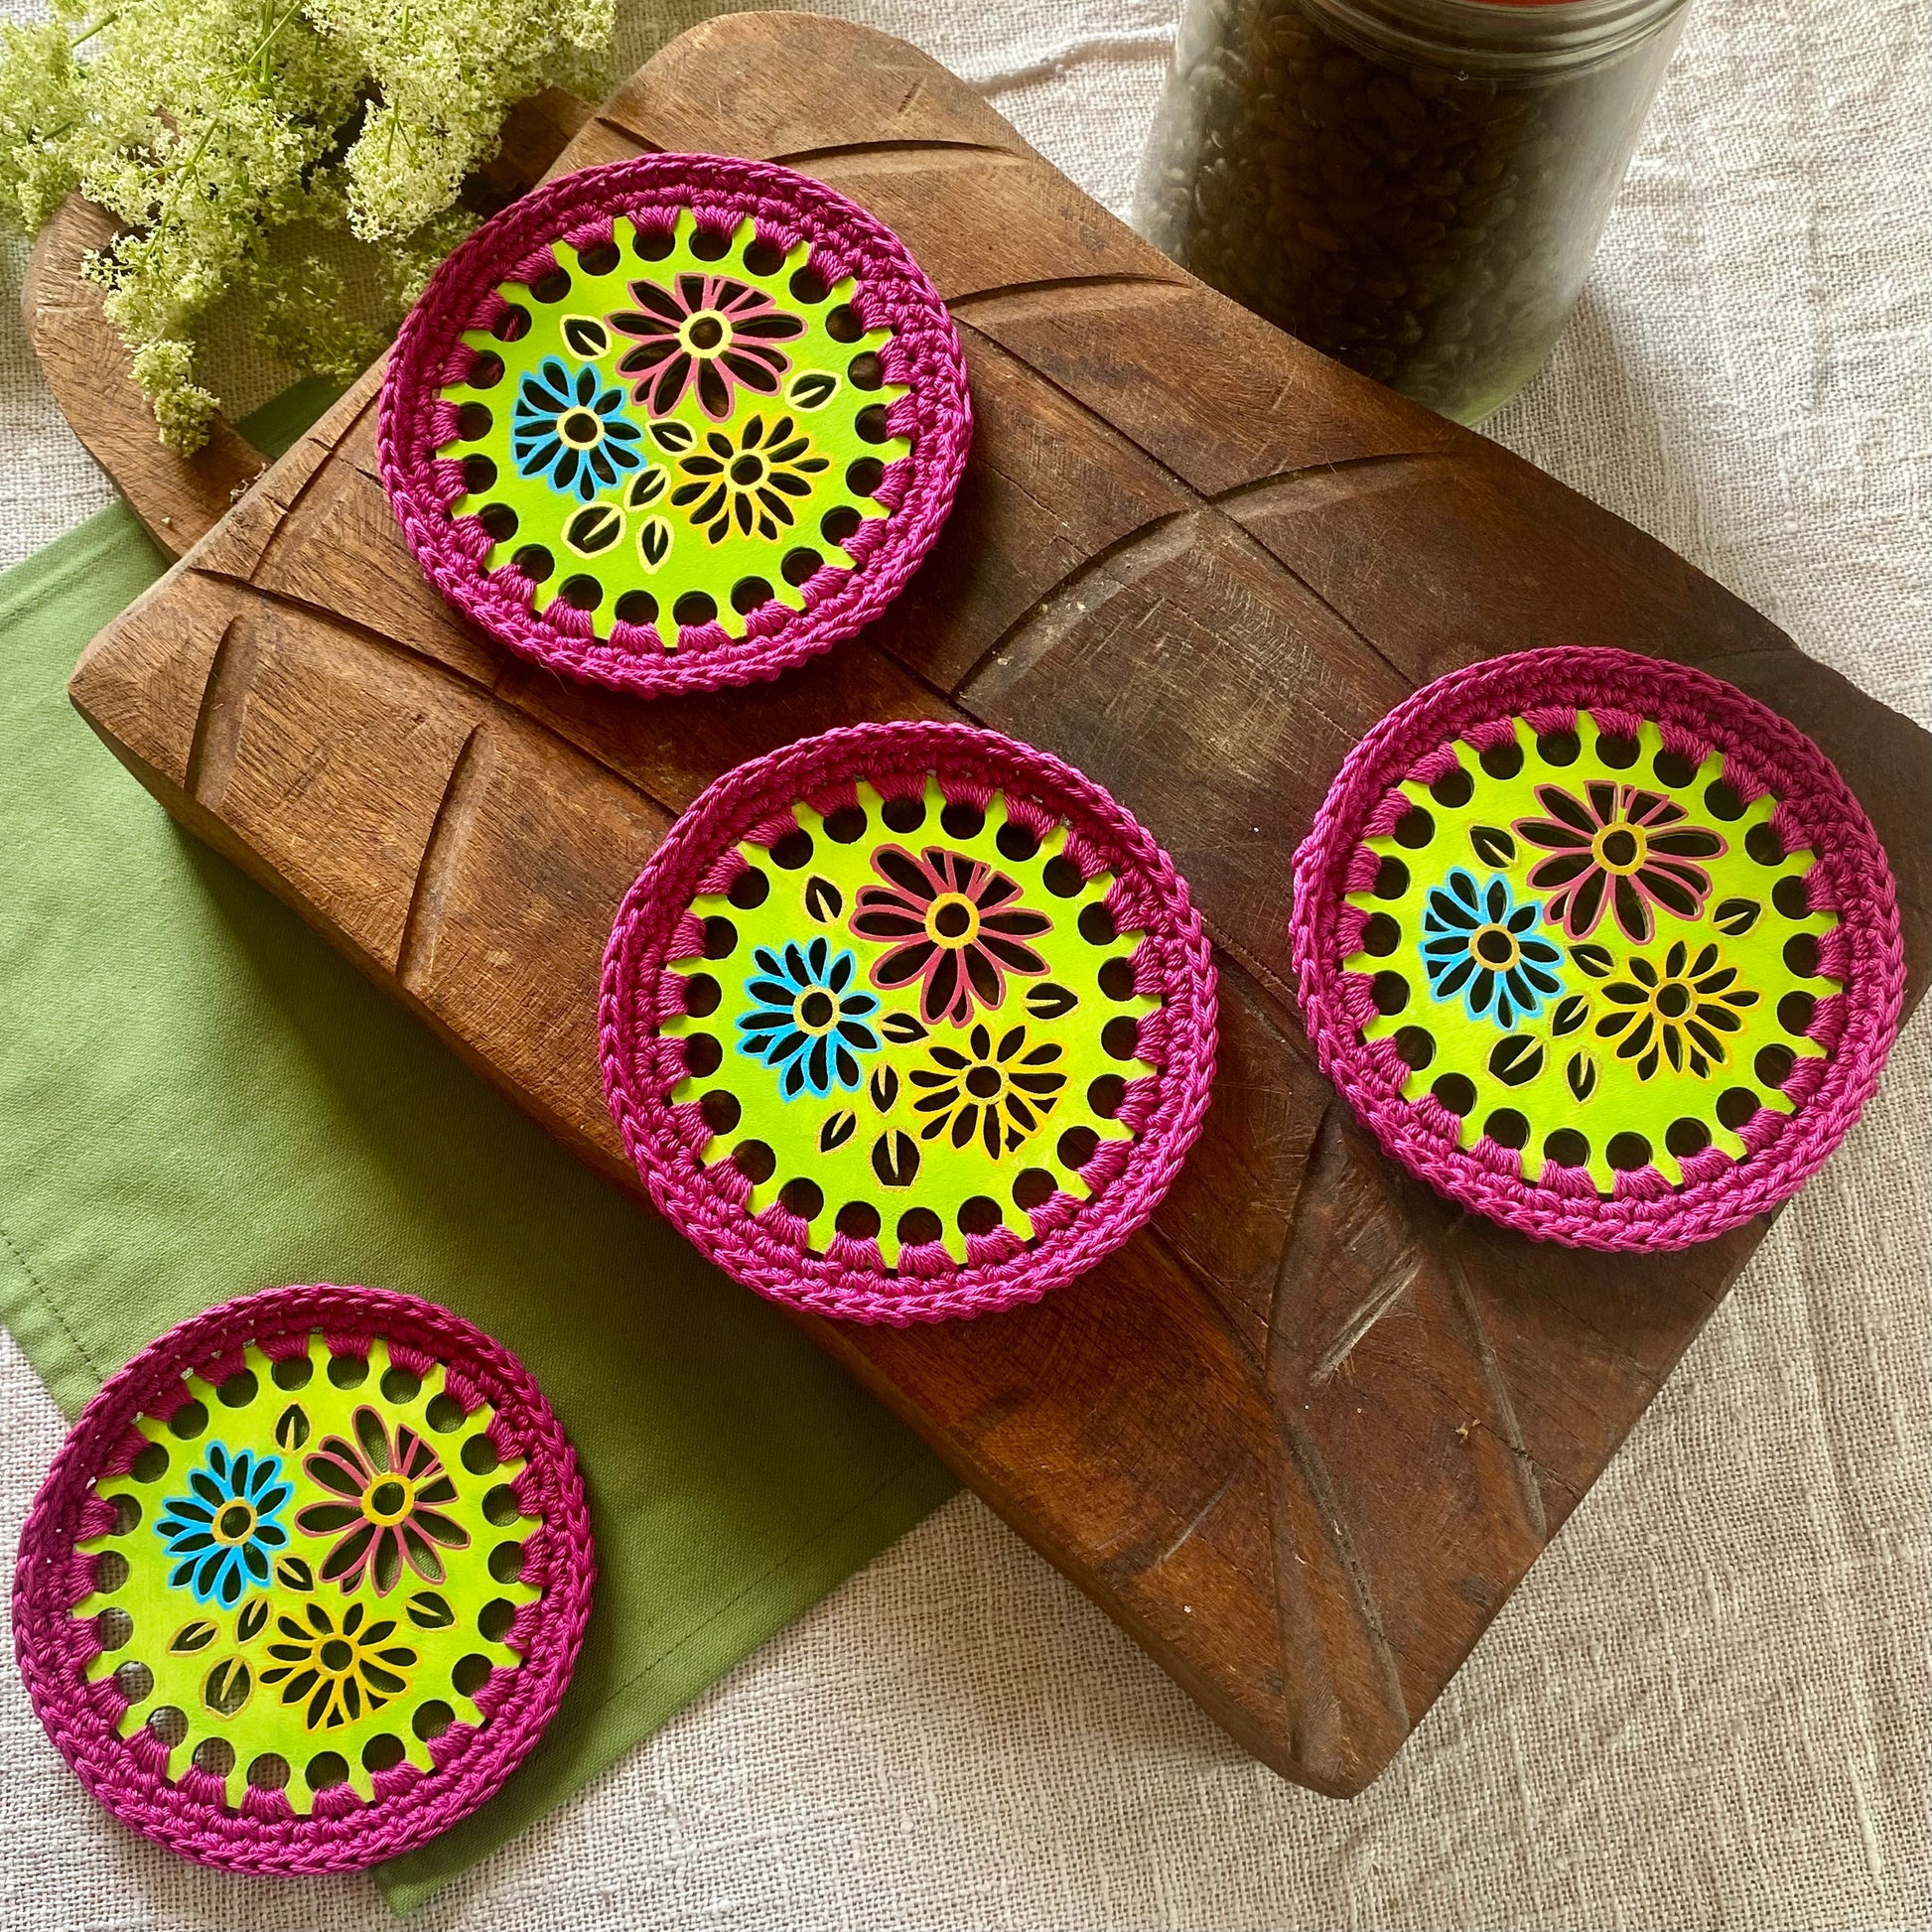 Retro Wooden Coasters with Flowers